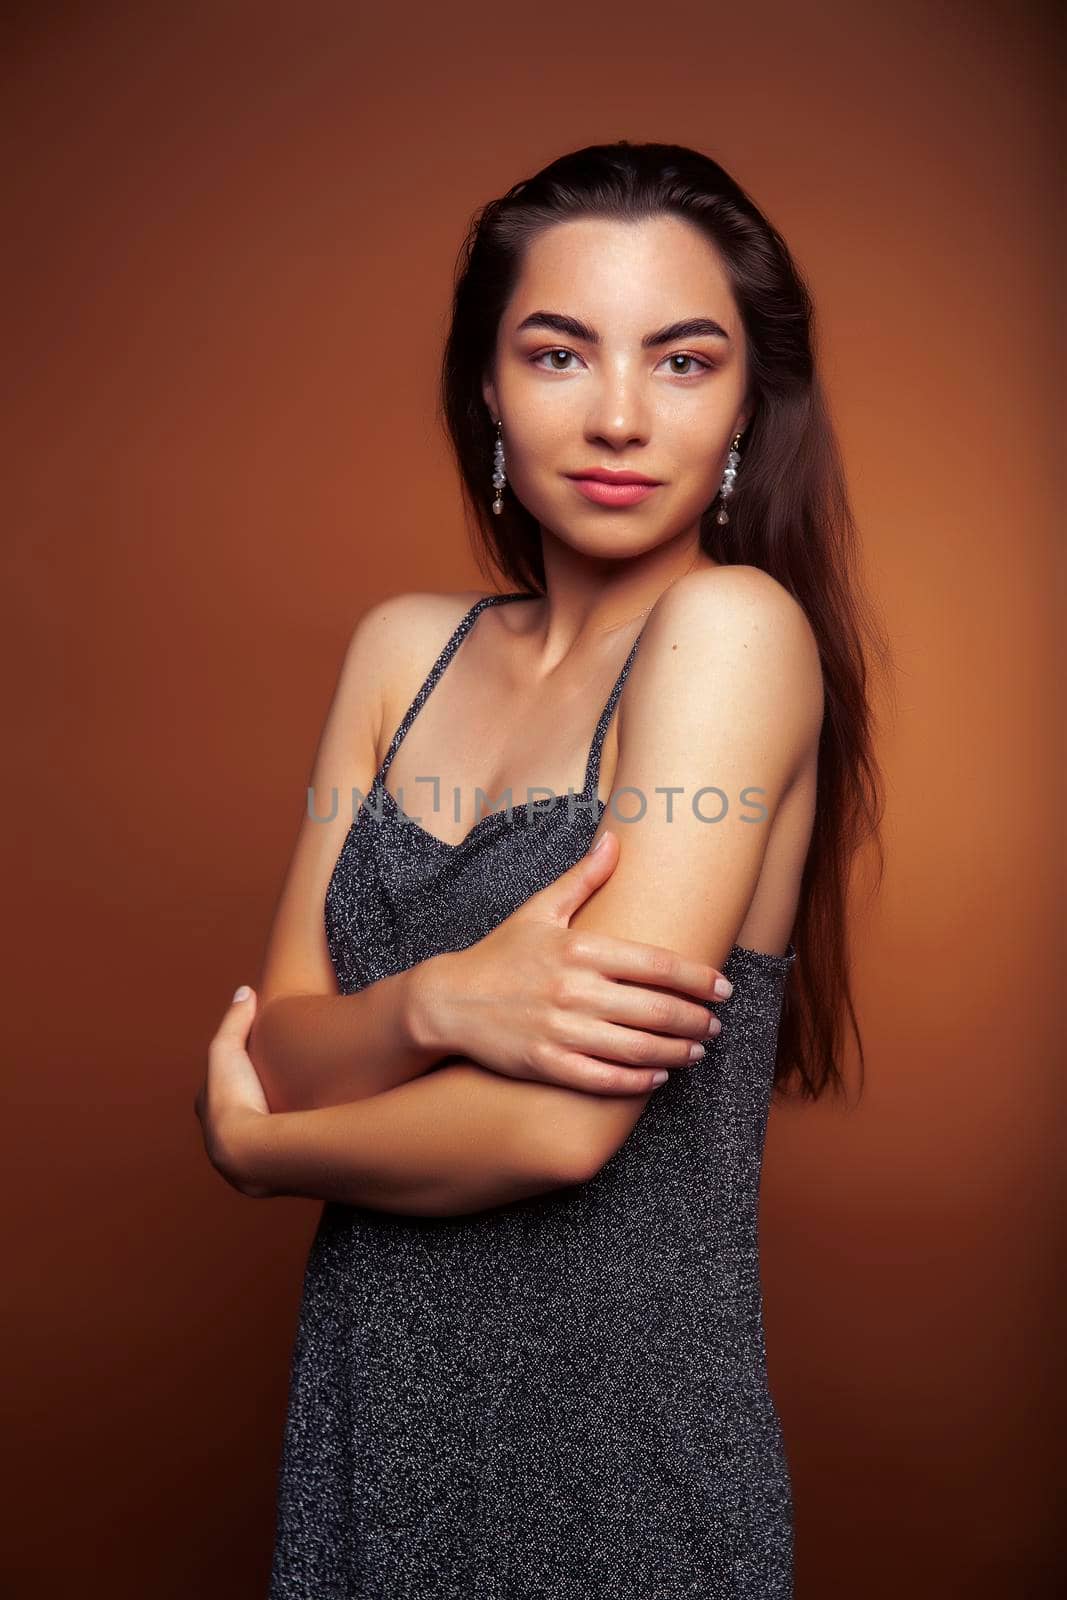 pretty girl happy posing: brunette on brown background, lifestyle people concept closeup